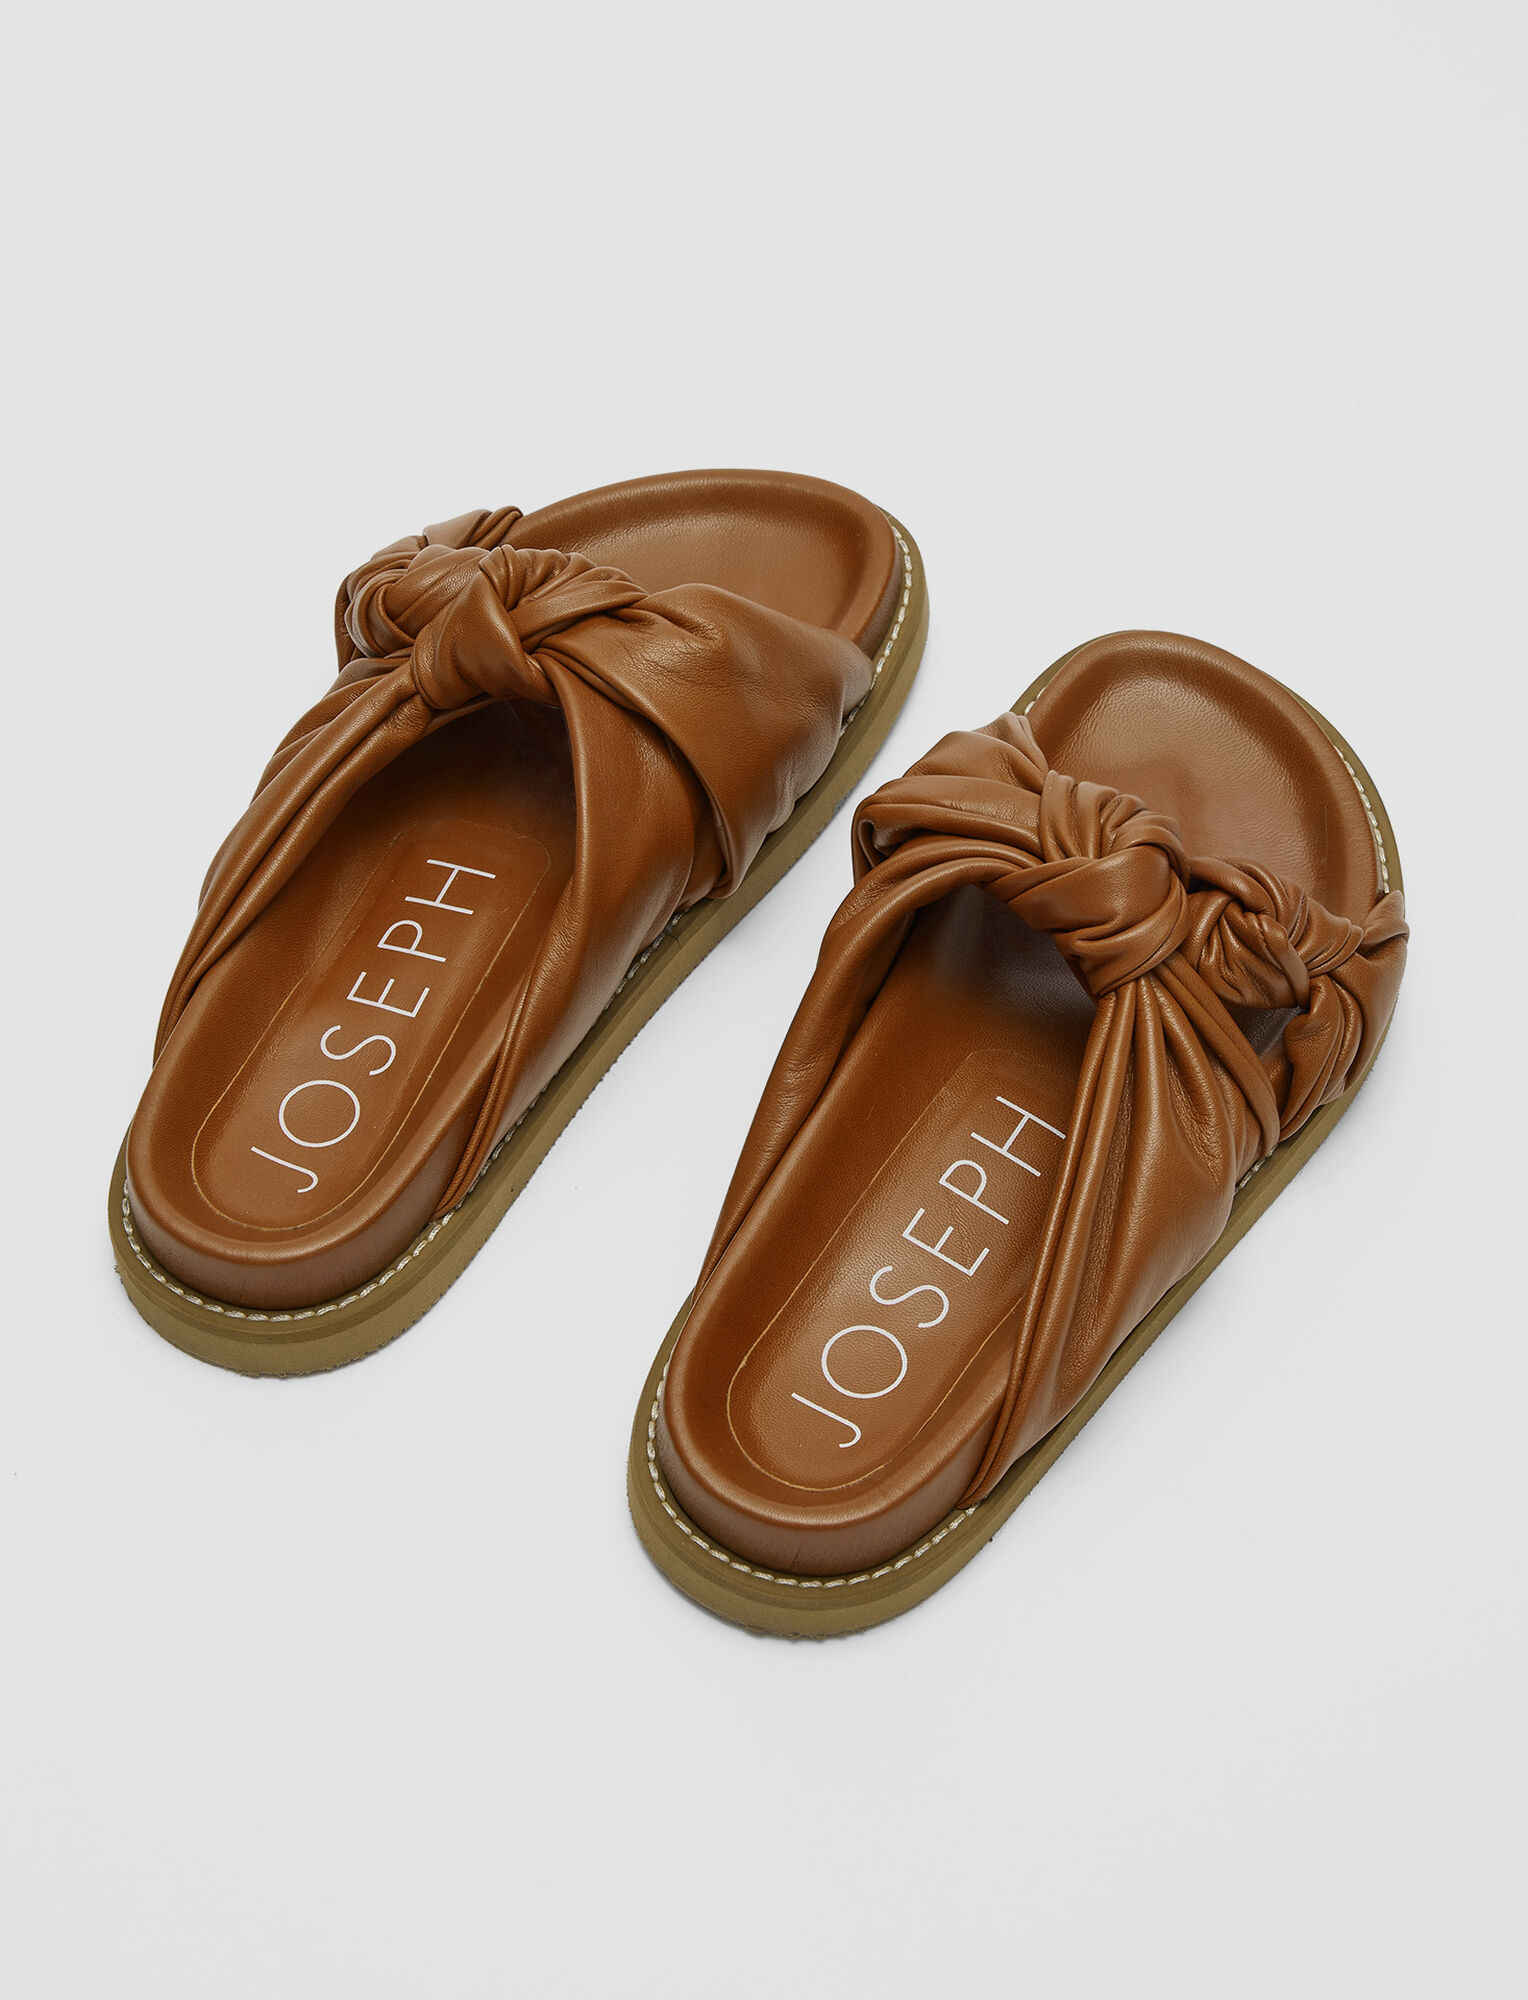 Joseph, Leather Big Knot Sandals, in Camel